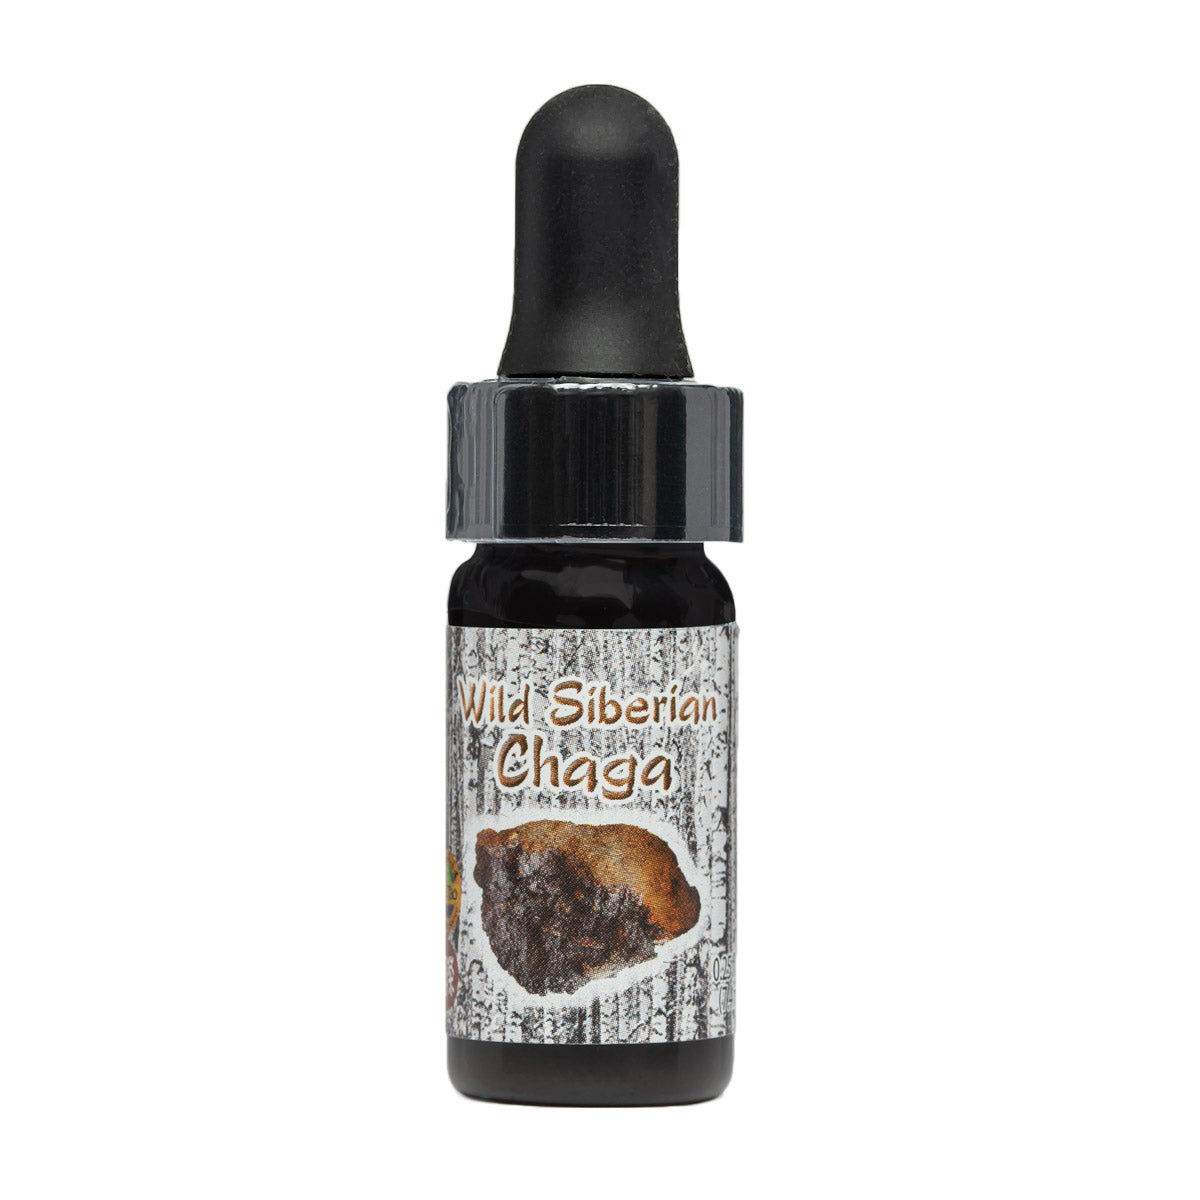 Wild Siberian Chaga Dragon Drops | Dragon Herbs | Raw Living UK | Tonic Herbs | Dragon Herbs Wild Siberian Chaga Drops are best quality. Chaga is known as the "King of Mushrooms," for bringing "glowing health" and for its immune support.